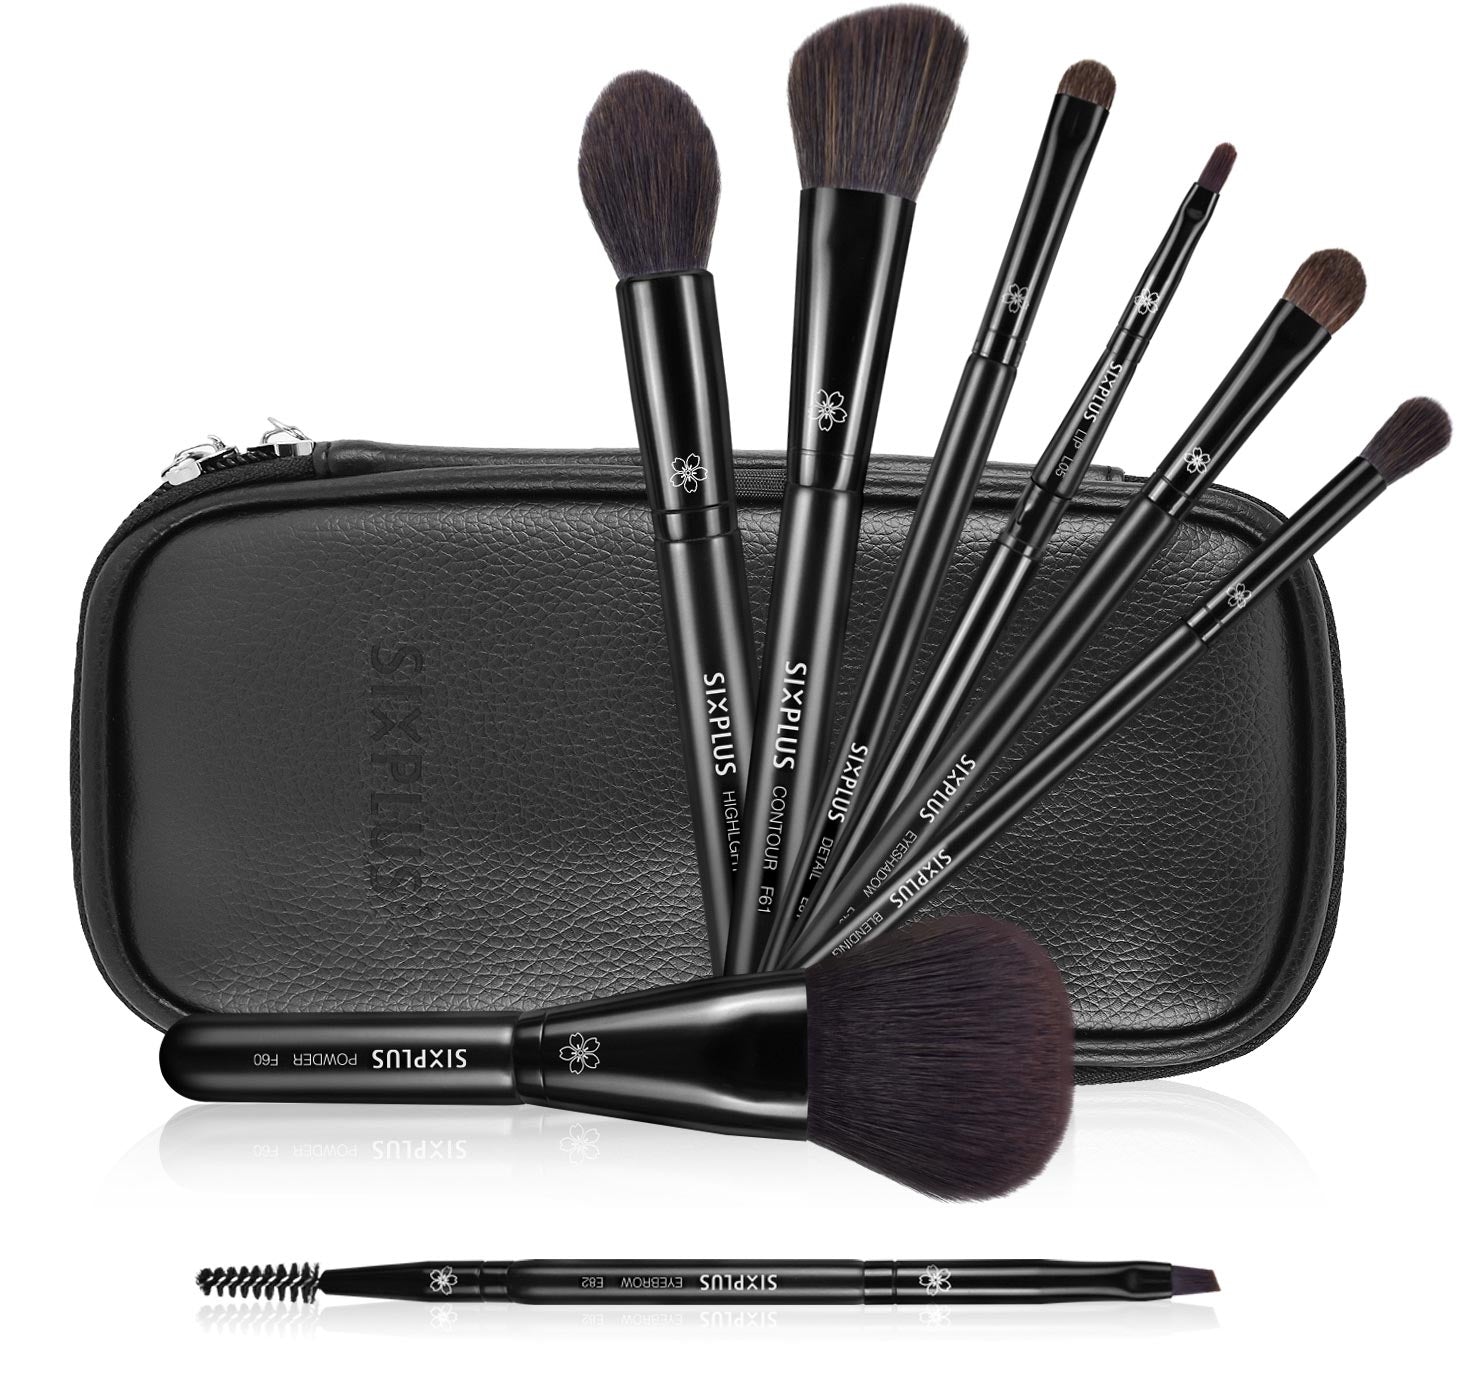 Kmart $6 cleaning mat transforms makeup brushes in seconds